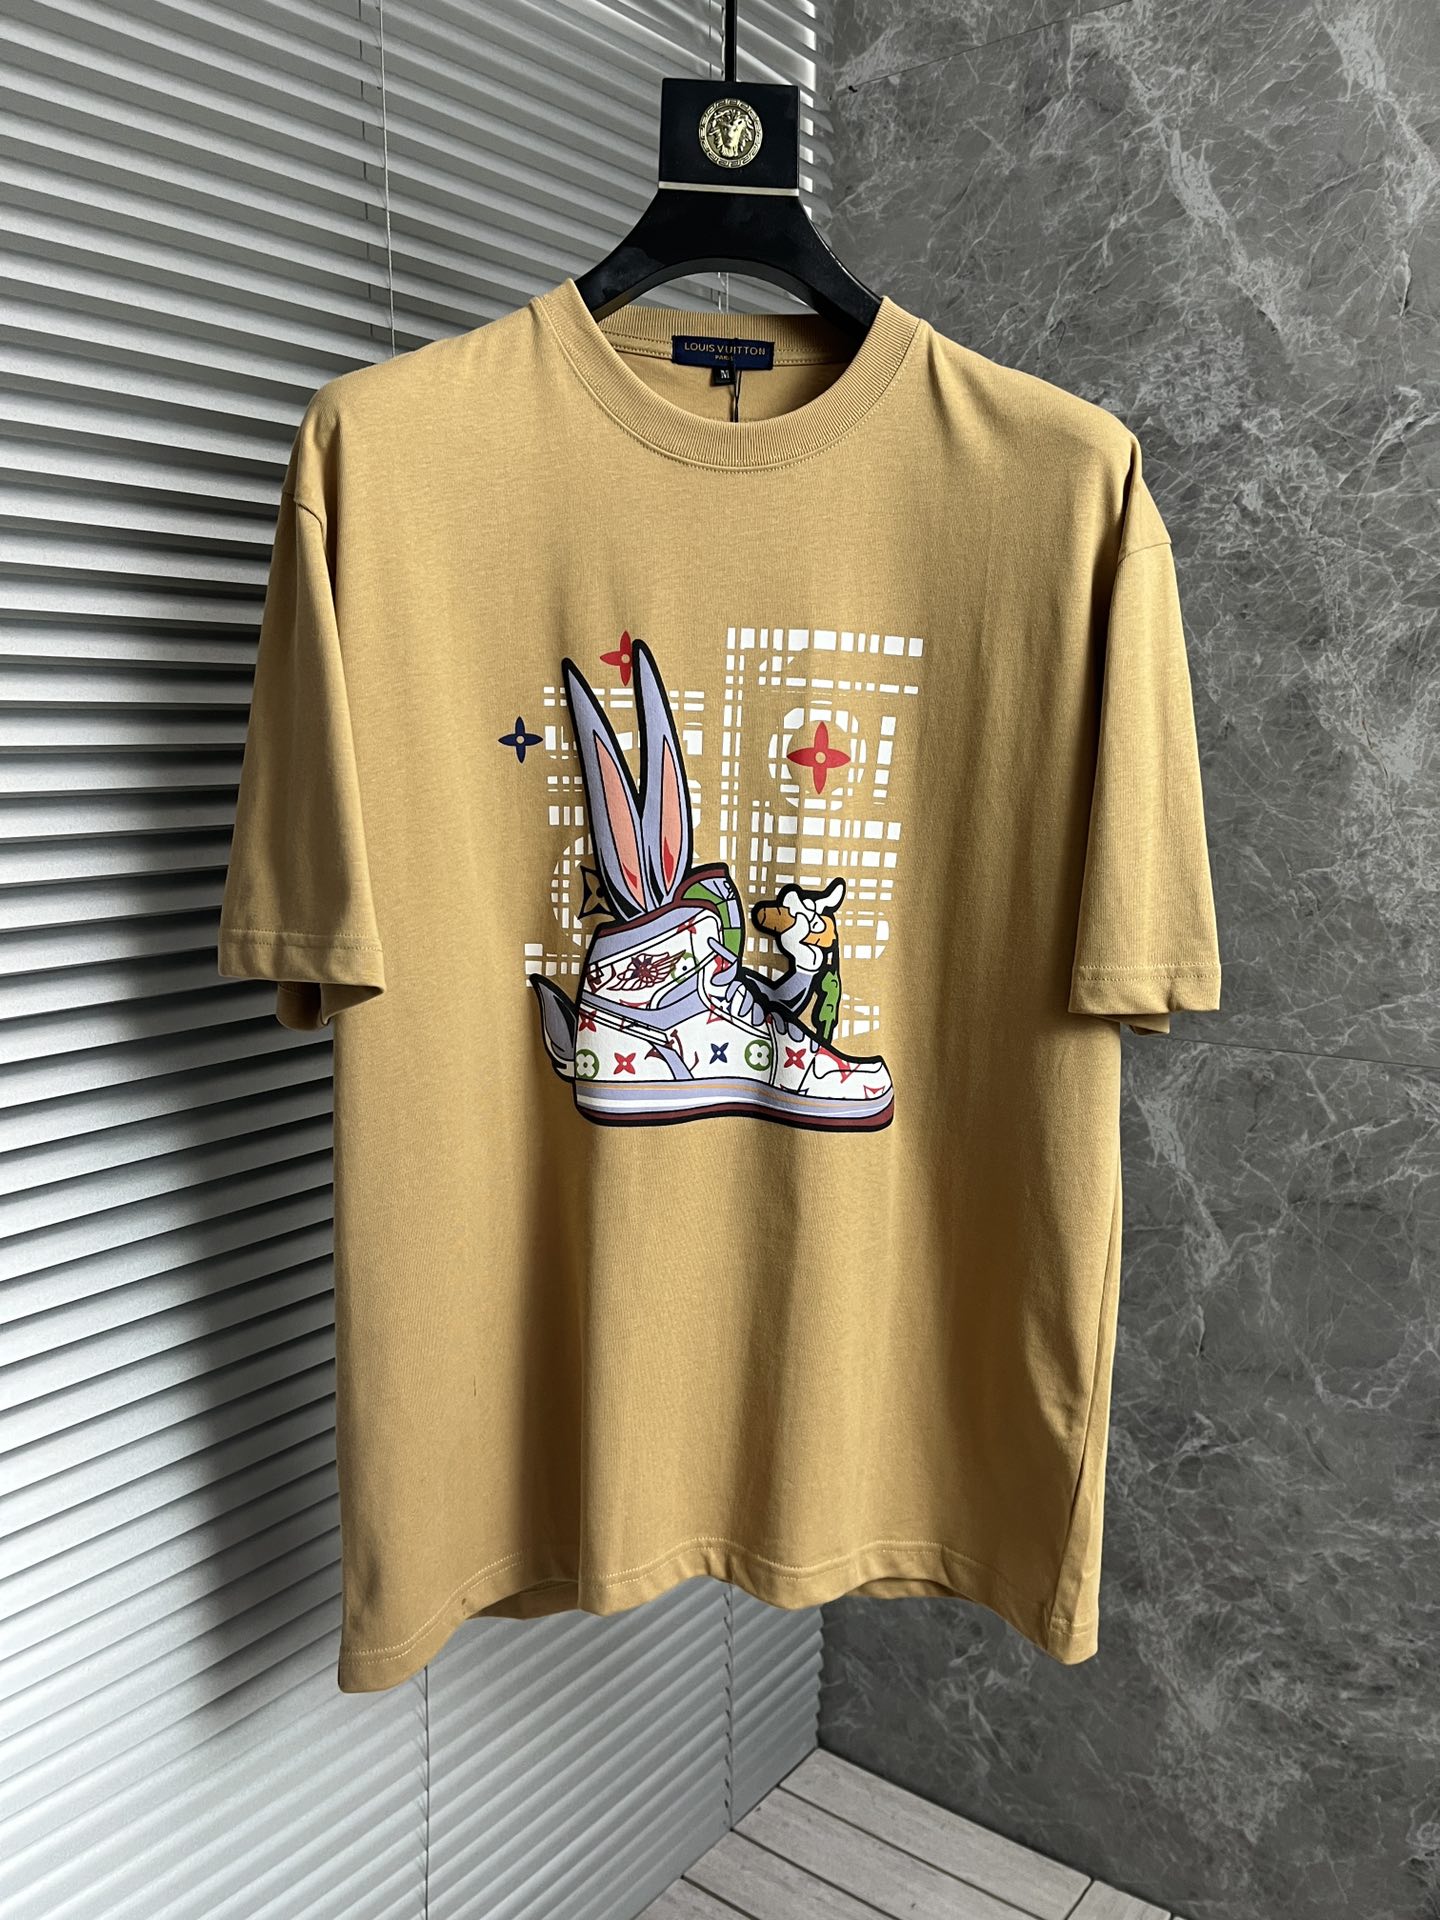 We Curate The Best
 Louis Vuitton Clothing T-Shirt Printing Unisex Fashion Short Sleeve